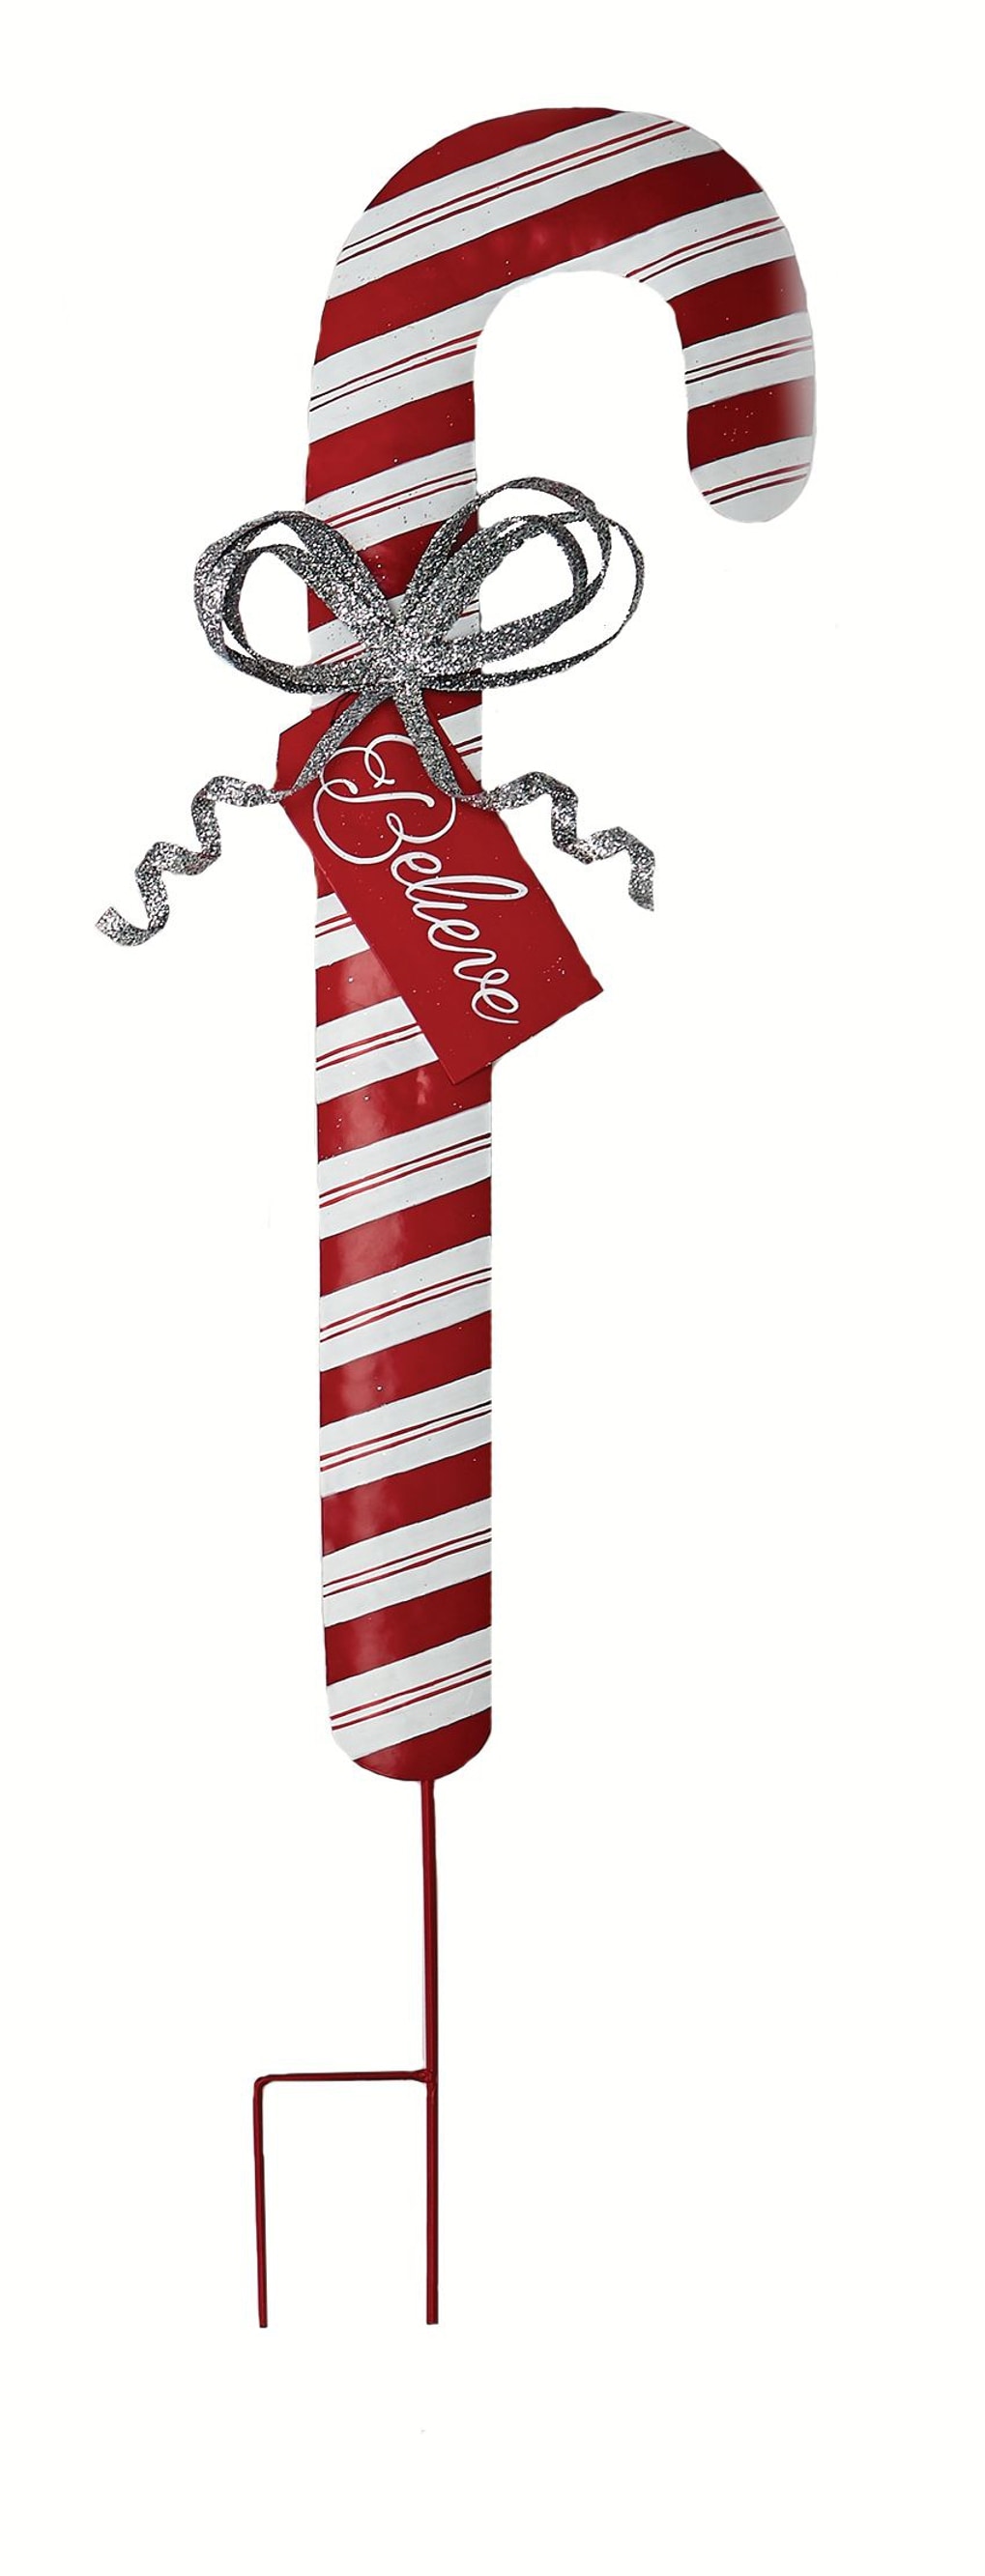 Candy cane Outdoor Christmas Decorations at Lowes.com